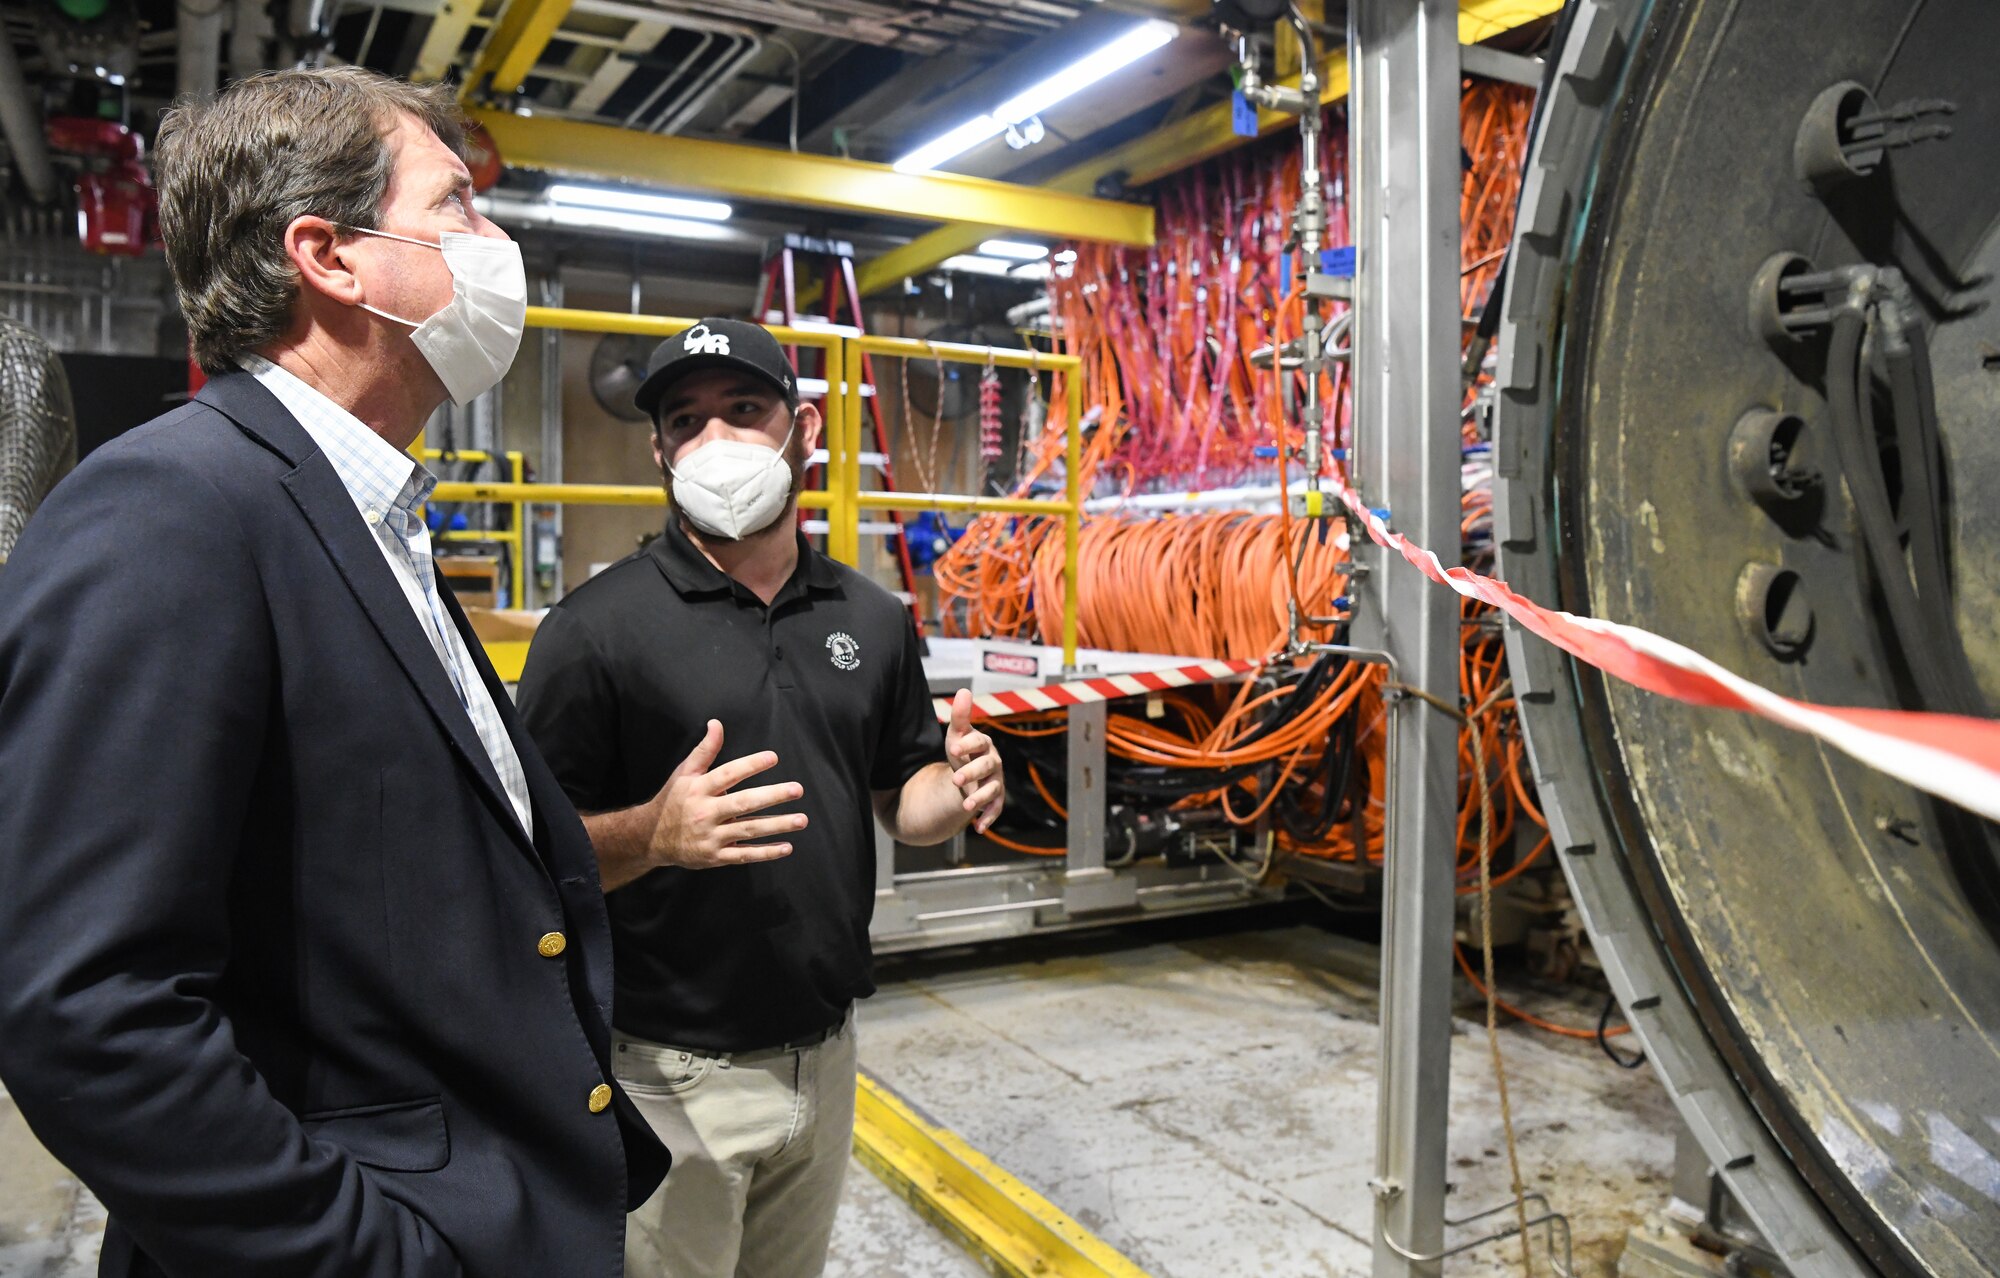 John Hile, right, an Arnold Engineering Development Complex (AEDC) test engineer, speaks with Sen. Bill Hagerty of Tennessee about the arc heaters used for high-temperature materials characterization and evaluation during a visit by the senator to the headquarters of AEDC, Arnold Air Force Base, Tenn., Aug. 23, 2021. Arc heaters allow for the testing of thermal protection systems in simulated environments representative of hypersonic flight. (U.S. Air Force photo by Jill Pickett)